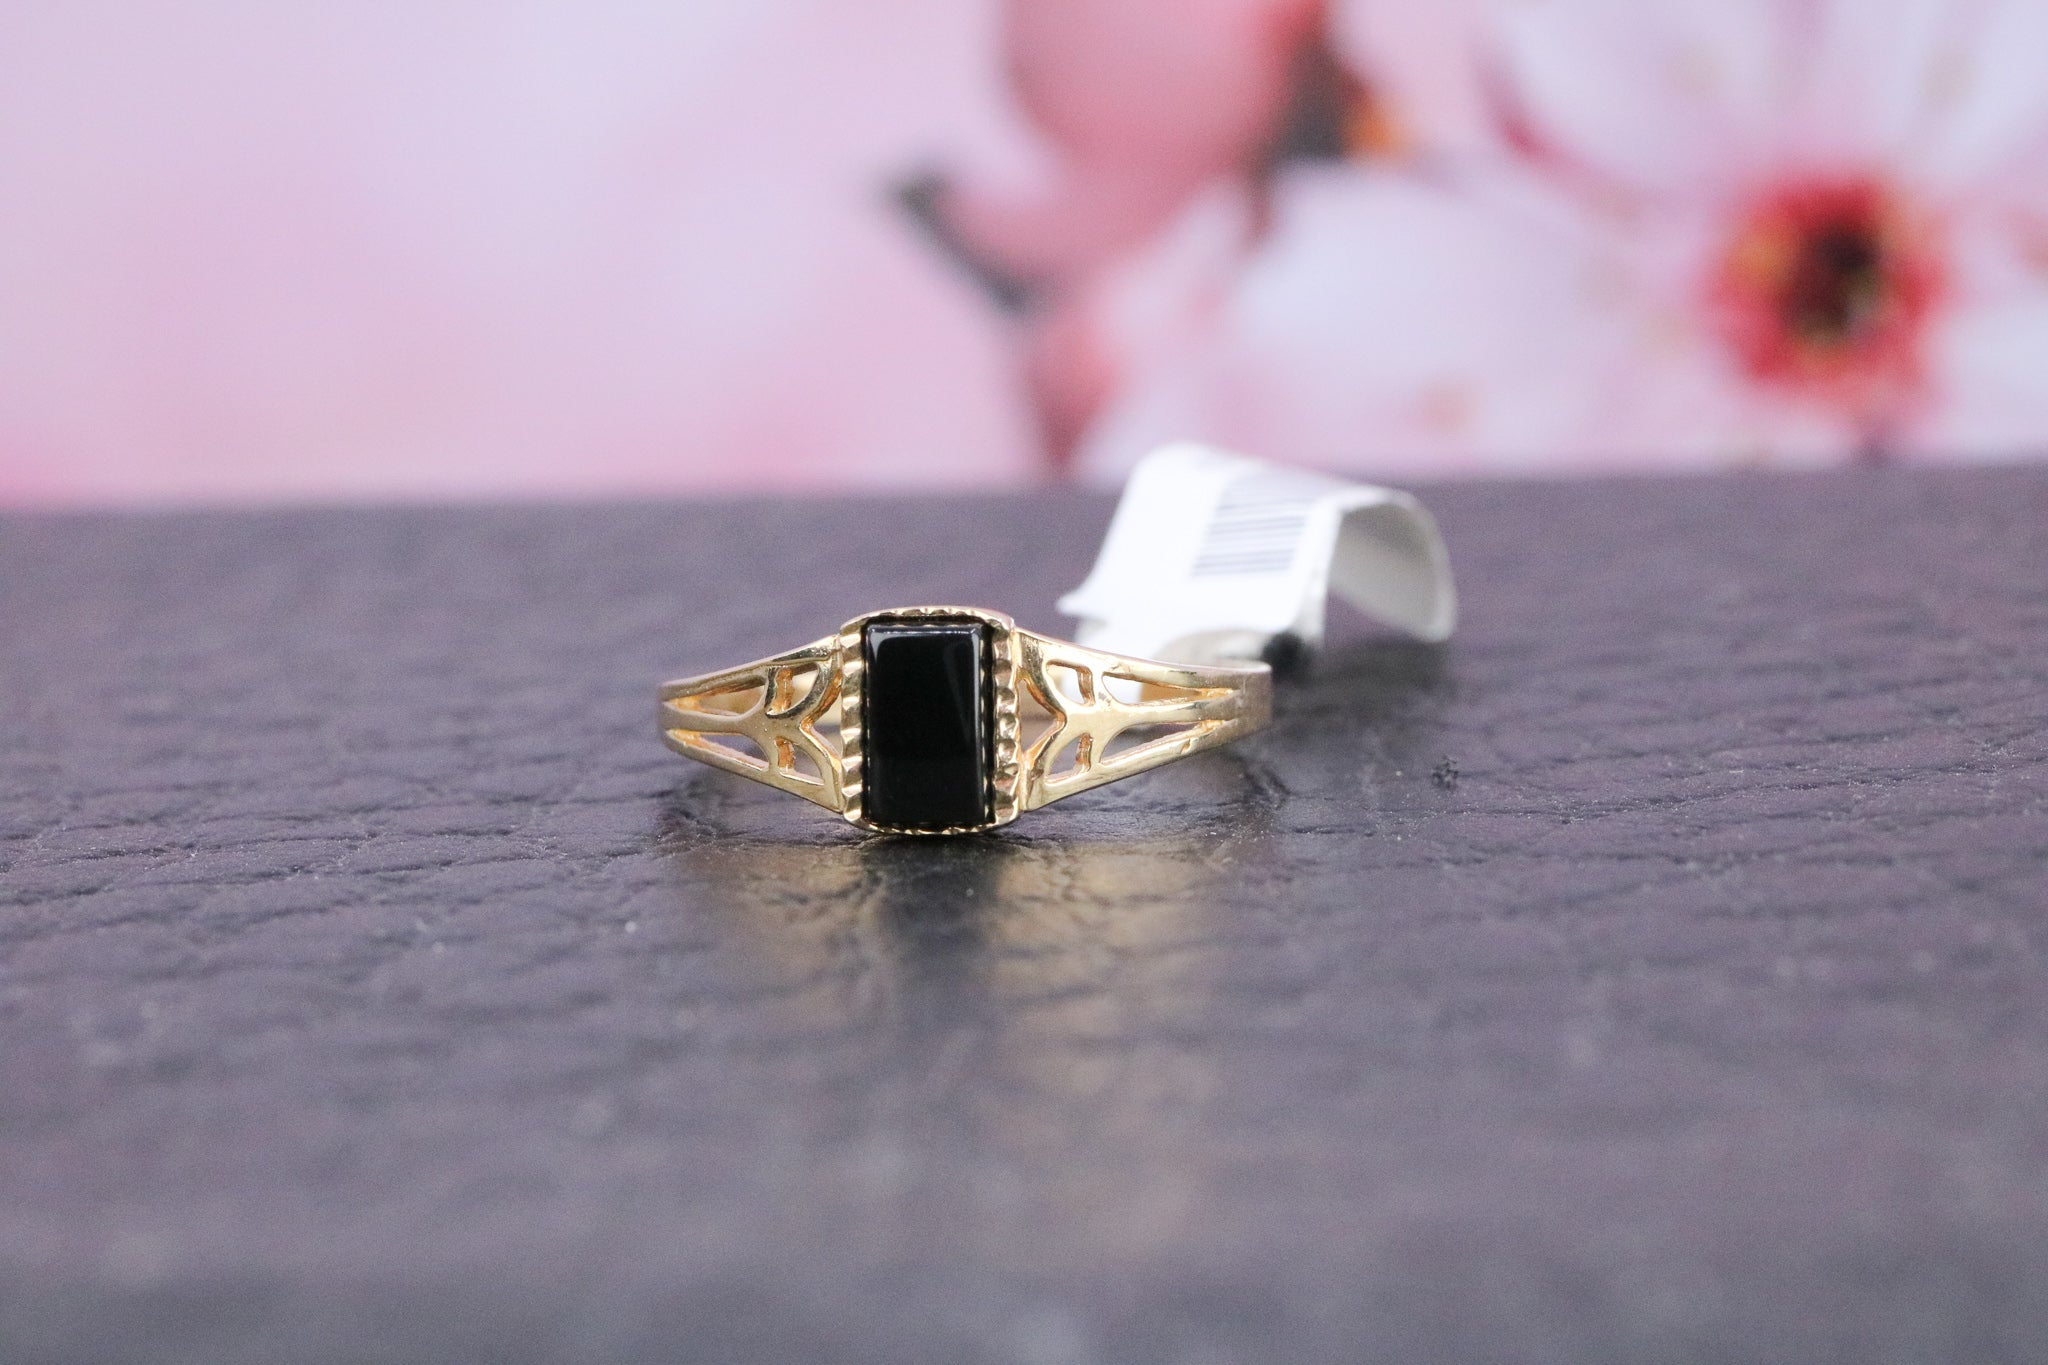 9ct Gold Onyx Ring - CO1339 - Hallmark Jewellers Formby & The Jewellers Bench Widnes